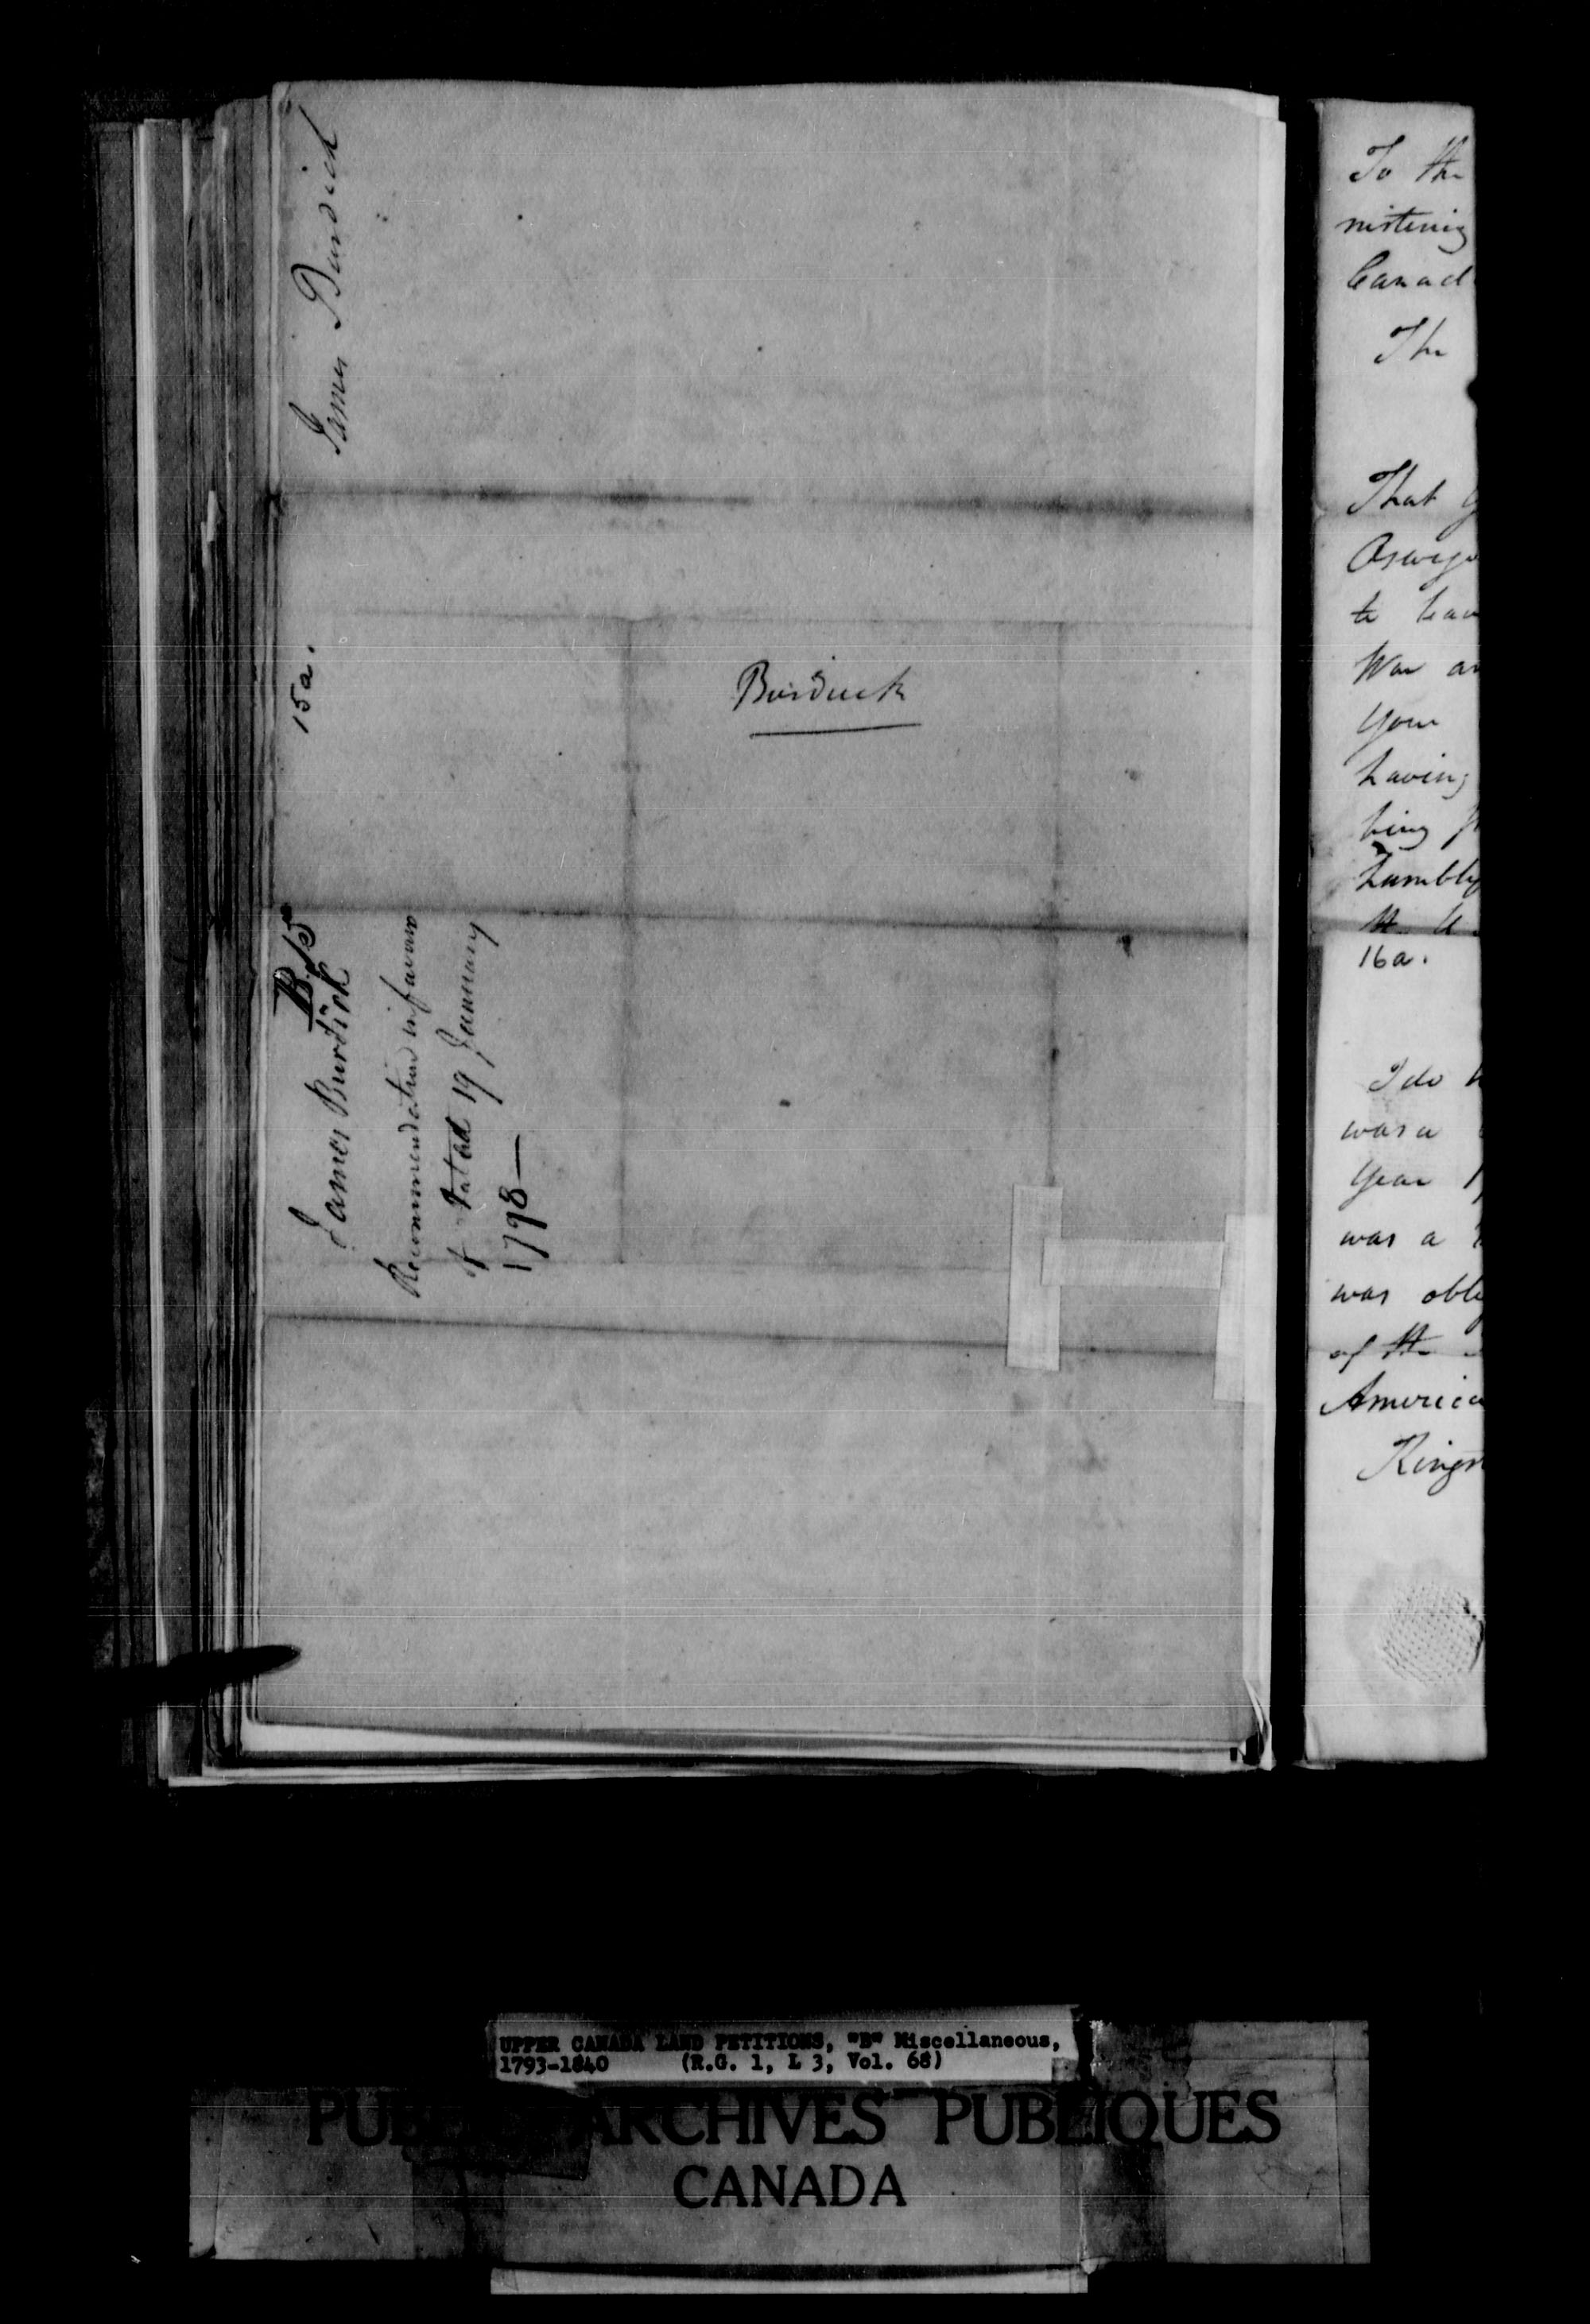 Title: Upper Canada Land Petitions (1763-1865) - Mikan Number: 205131 - Microform: c-1635